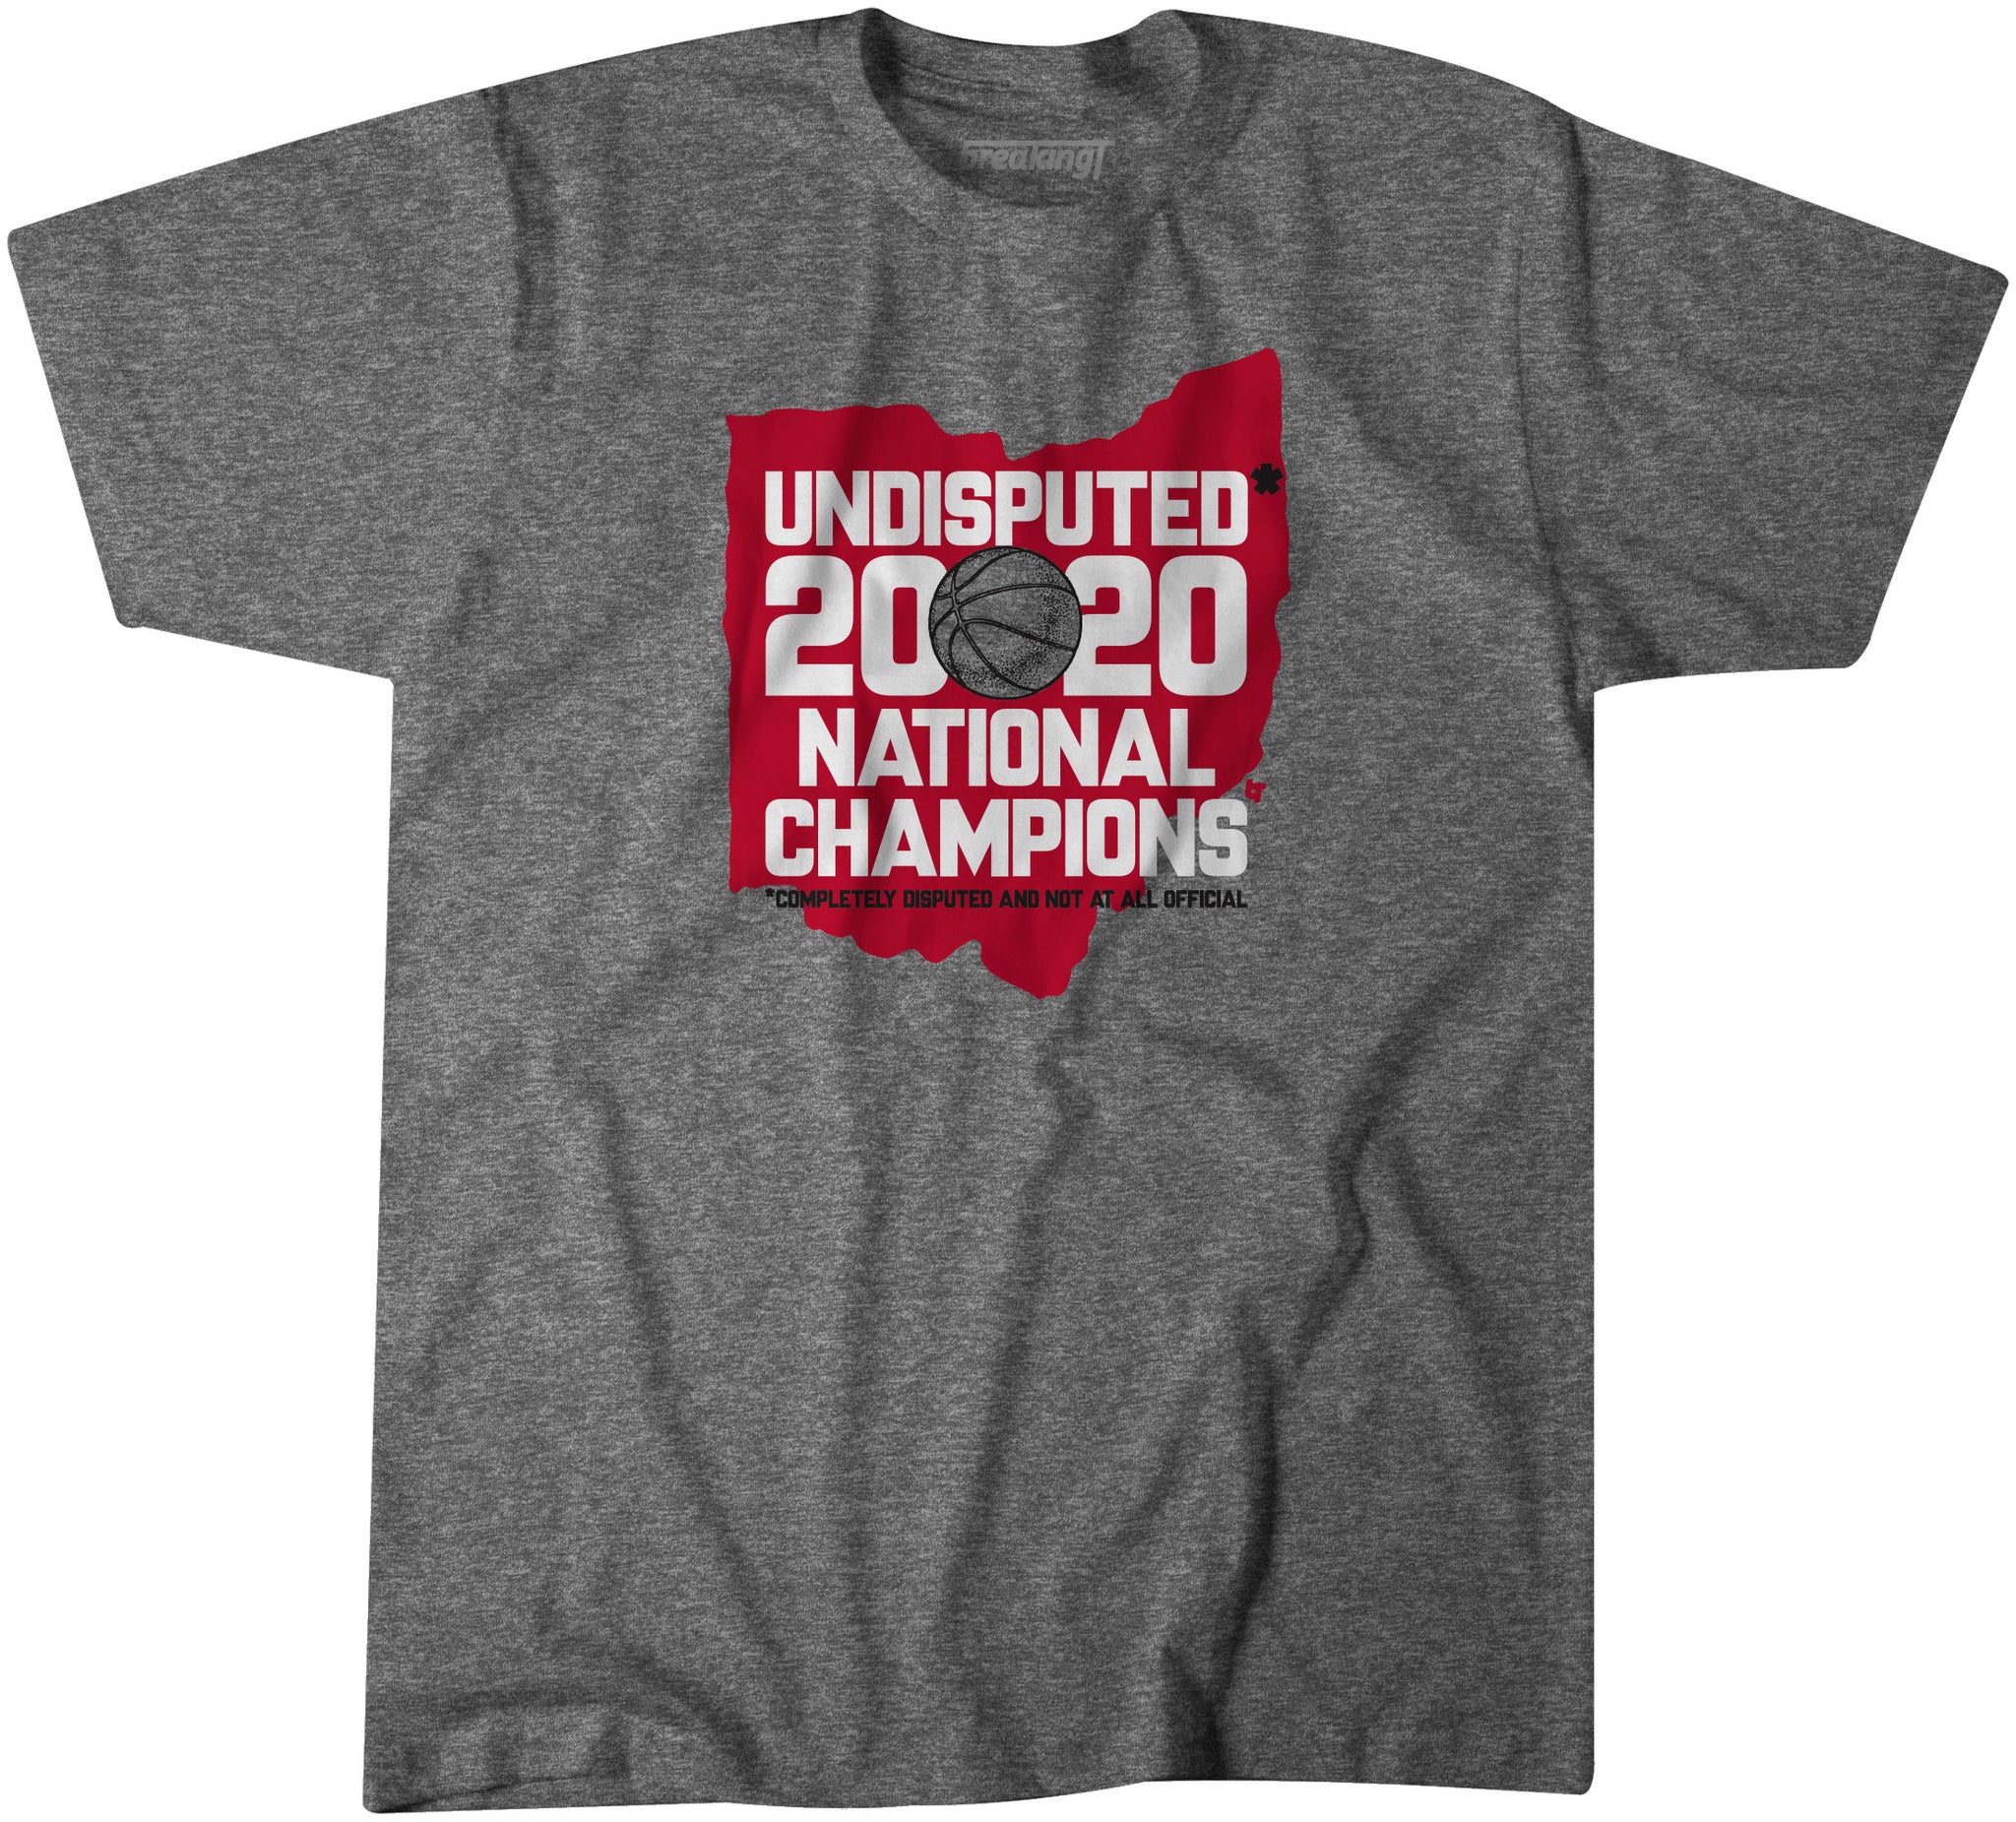 ohio state undisputed champs shirt